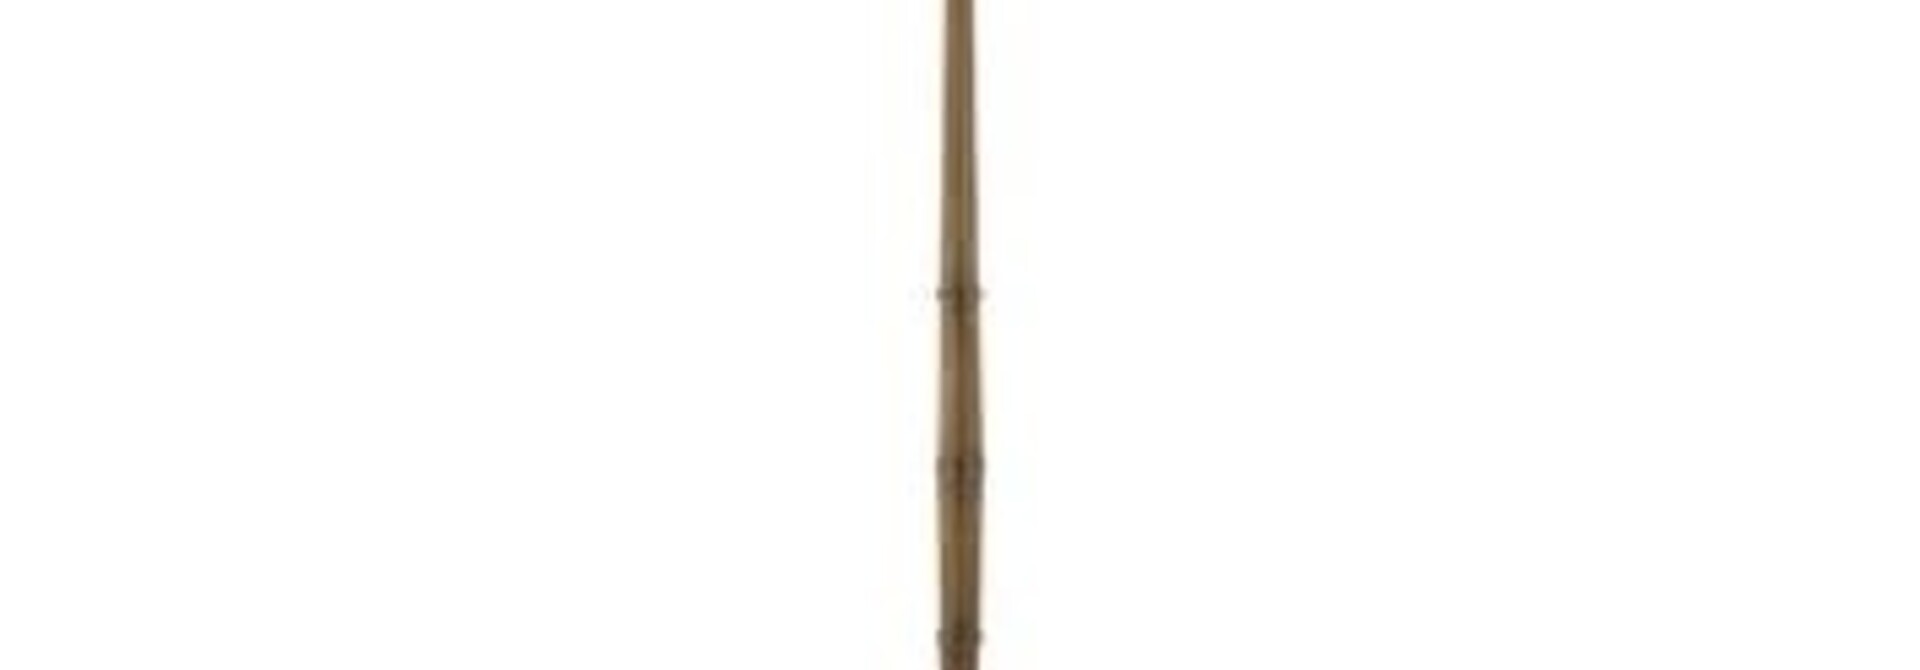 Harrelson | The Floor Lamp Collection - 18 Inch x 18 Inch x 67.5 Inch